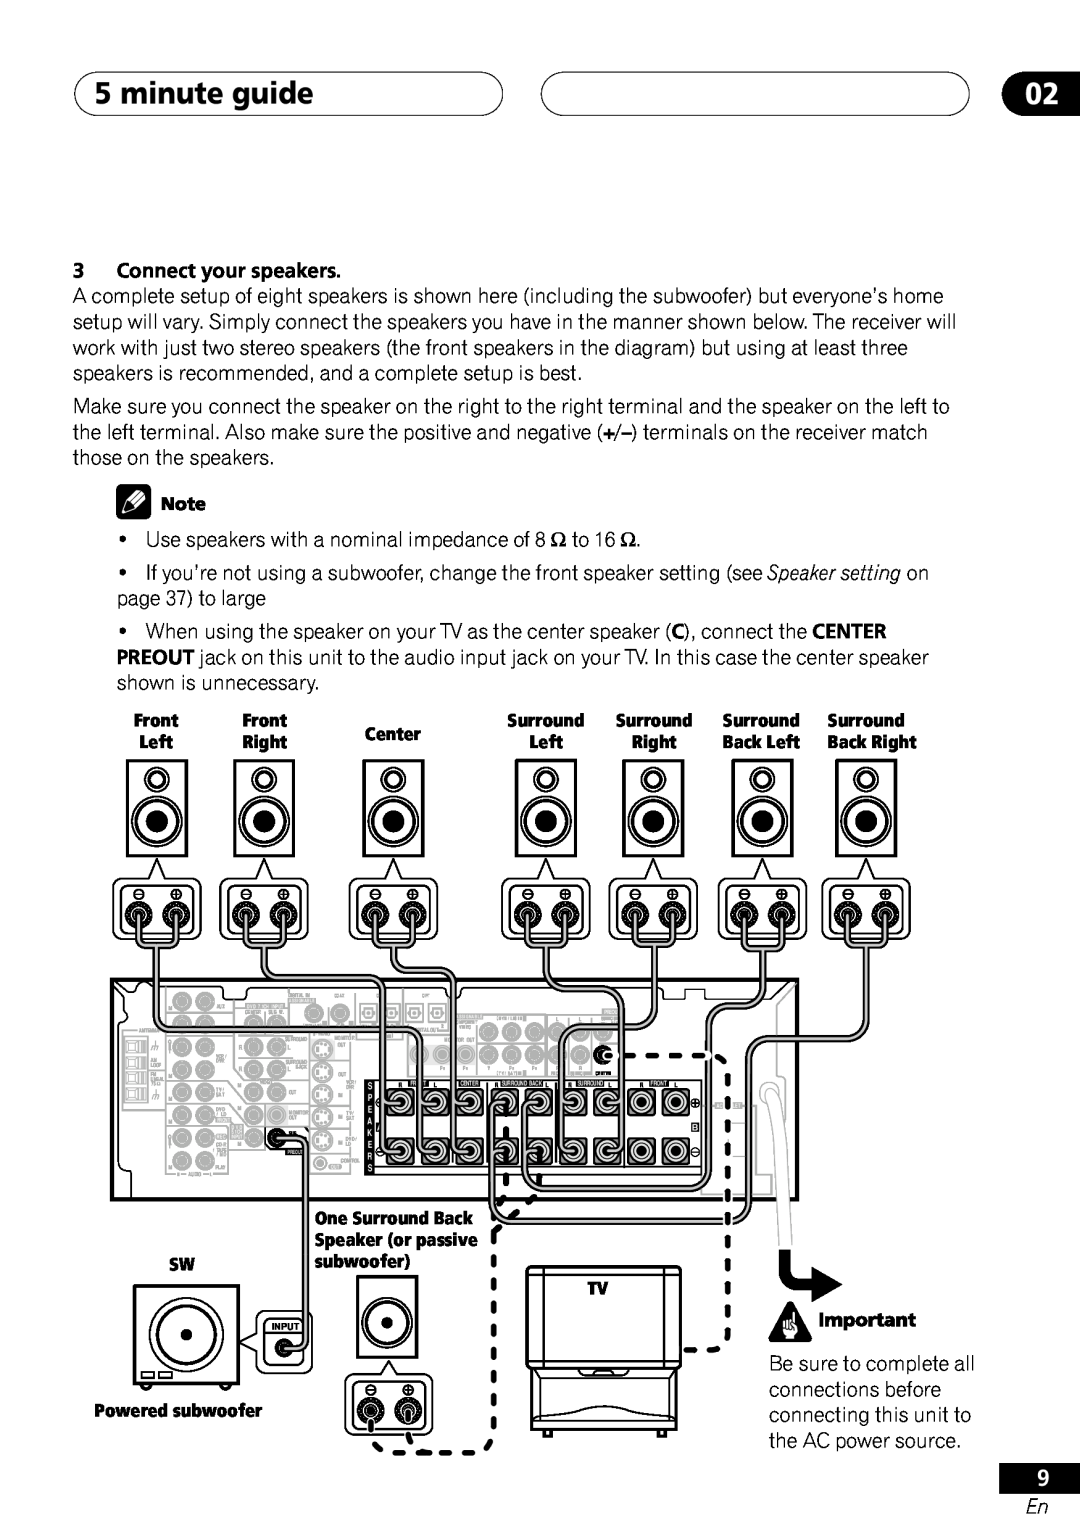 Pioneer VSX-41 manual minute guide, Connect your speakers 